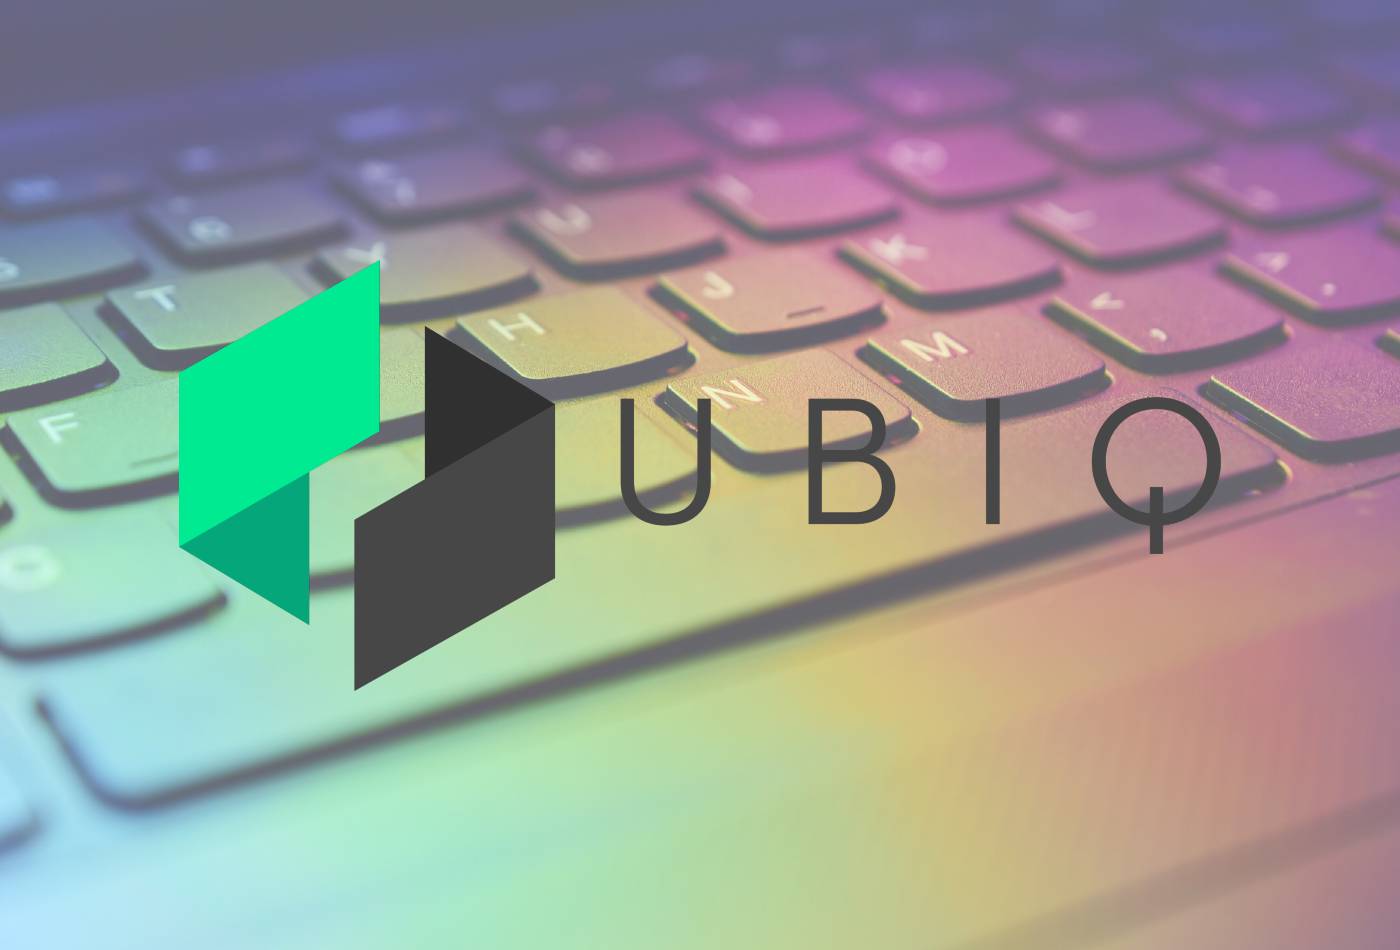 Ubiq (UBQ) Price Prediction 2022-2030: The Best Time To Buy